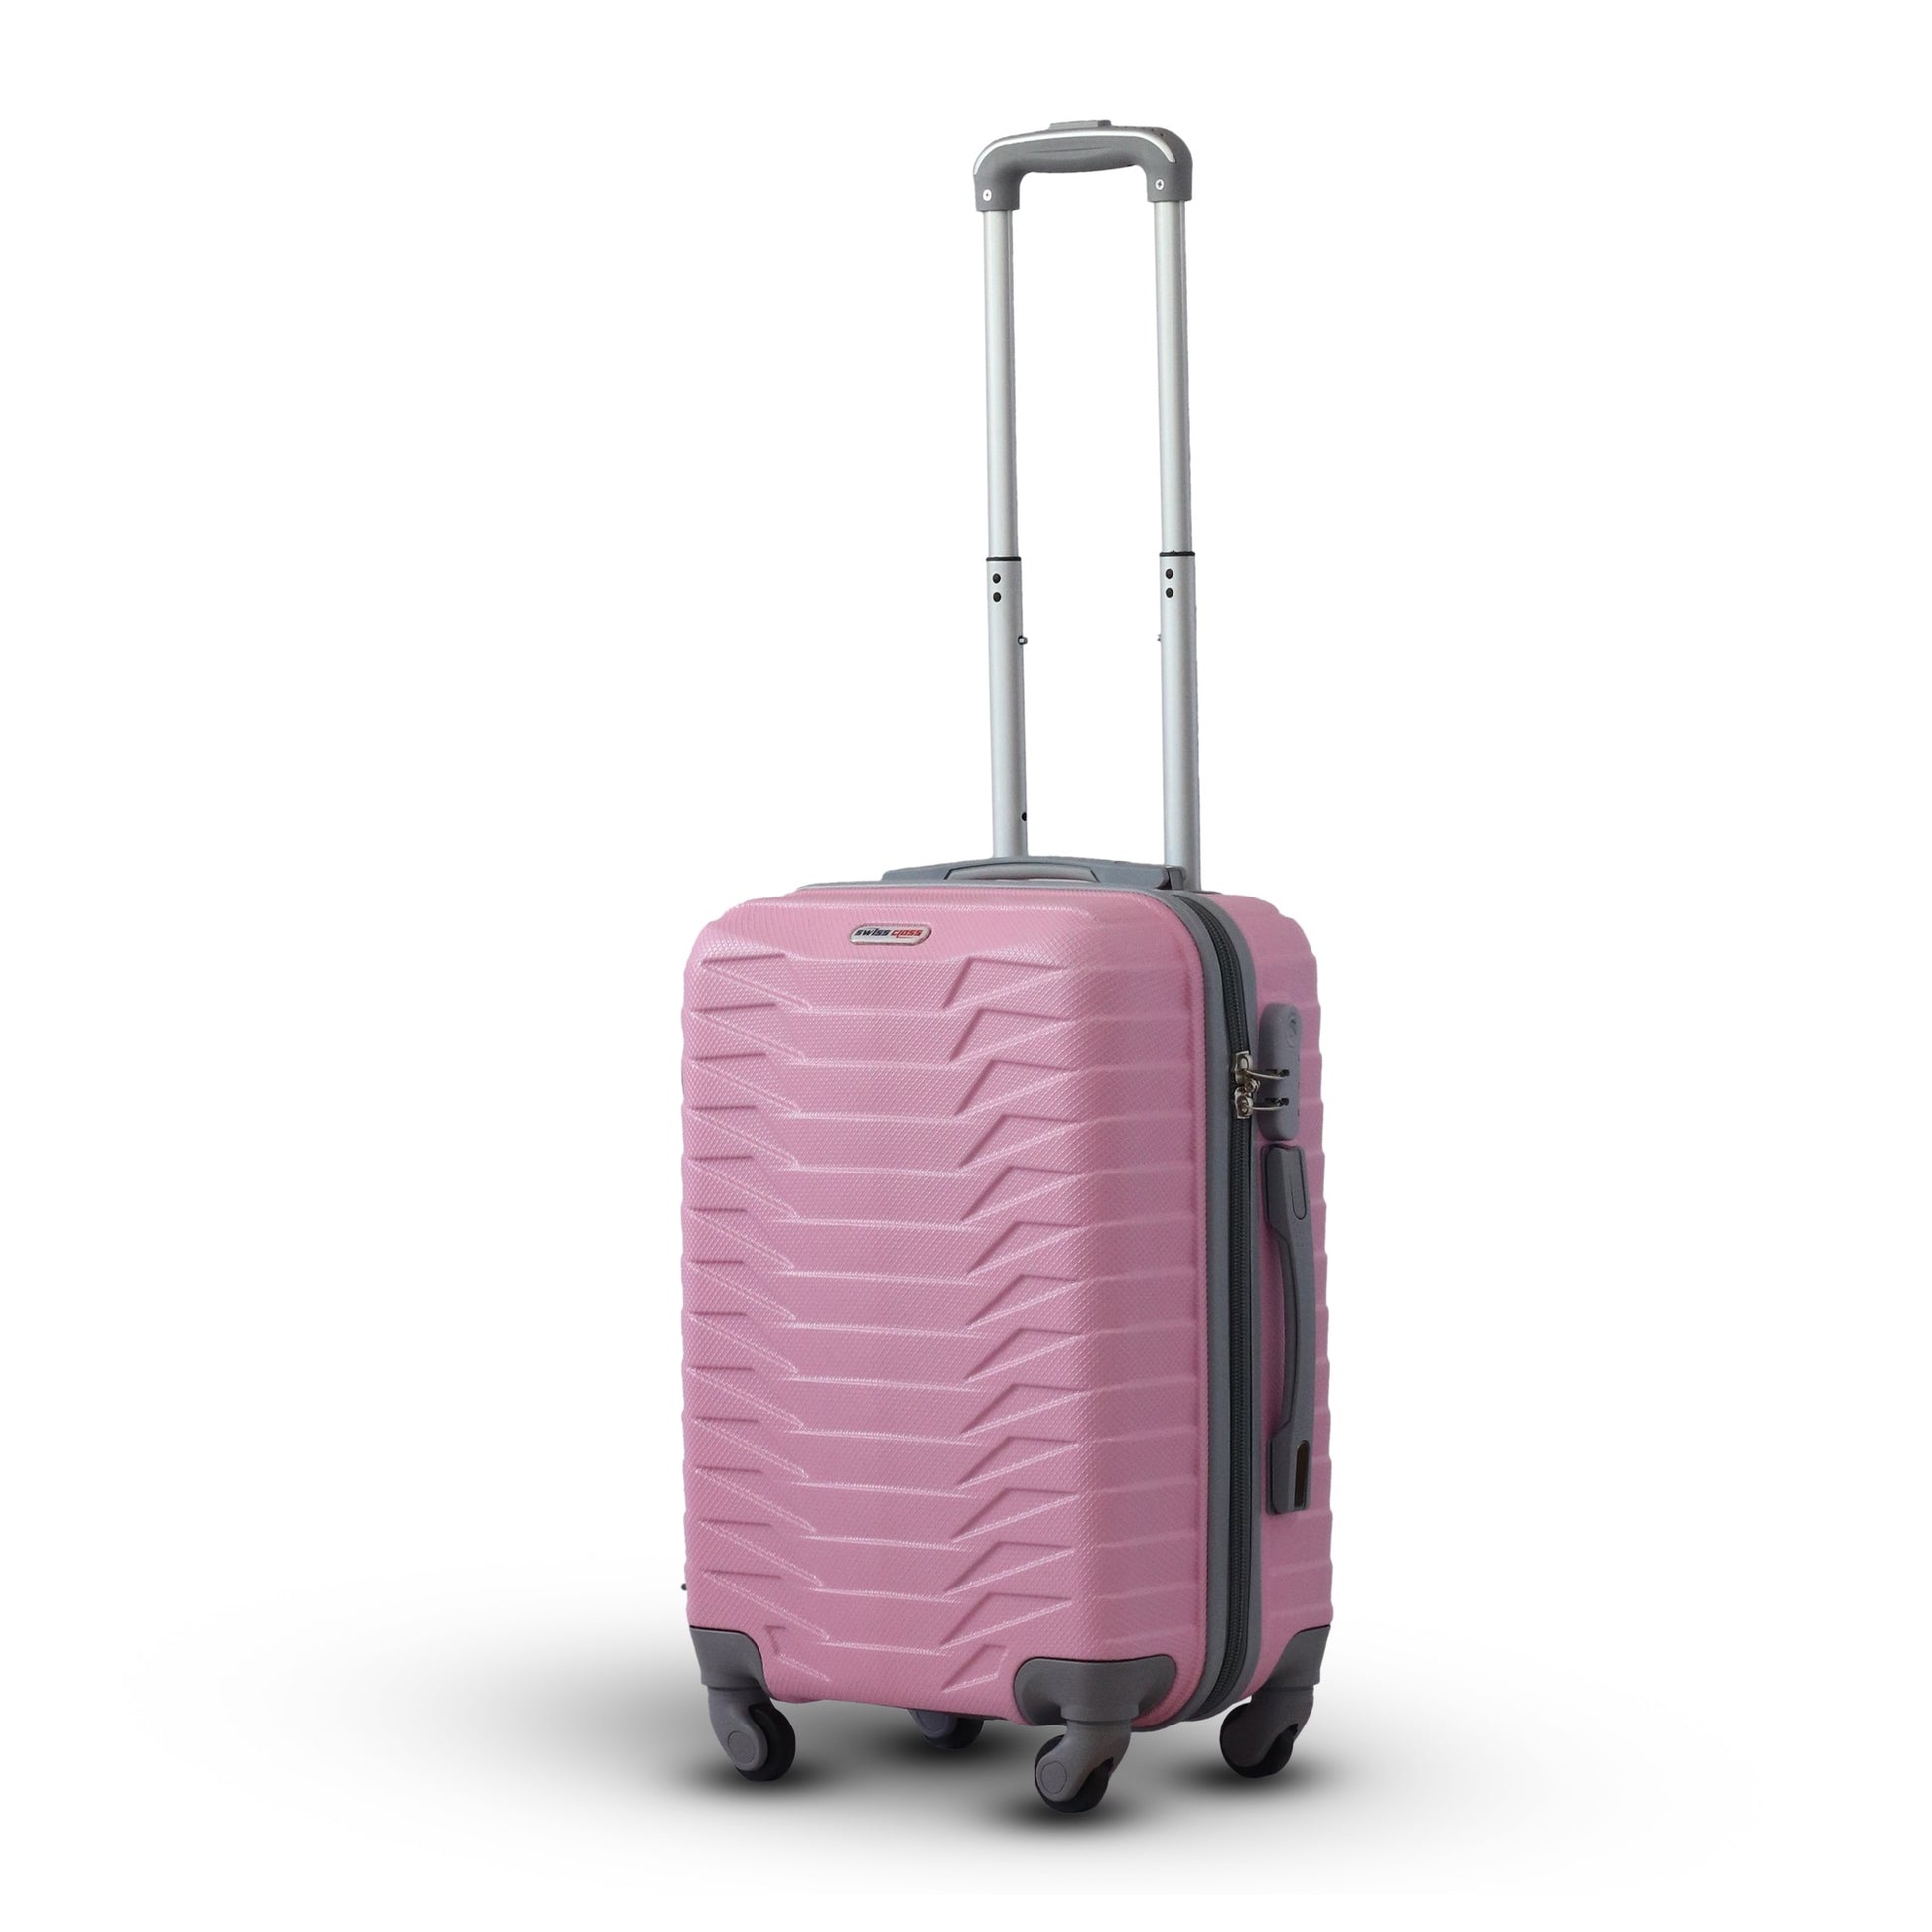 Swiss Class Crocodile ABS Lightweight pink Luggage Bag With Spinner Wheel Zaappy